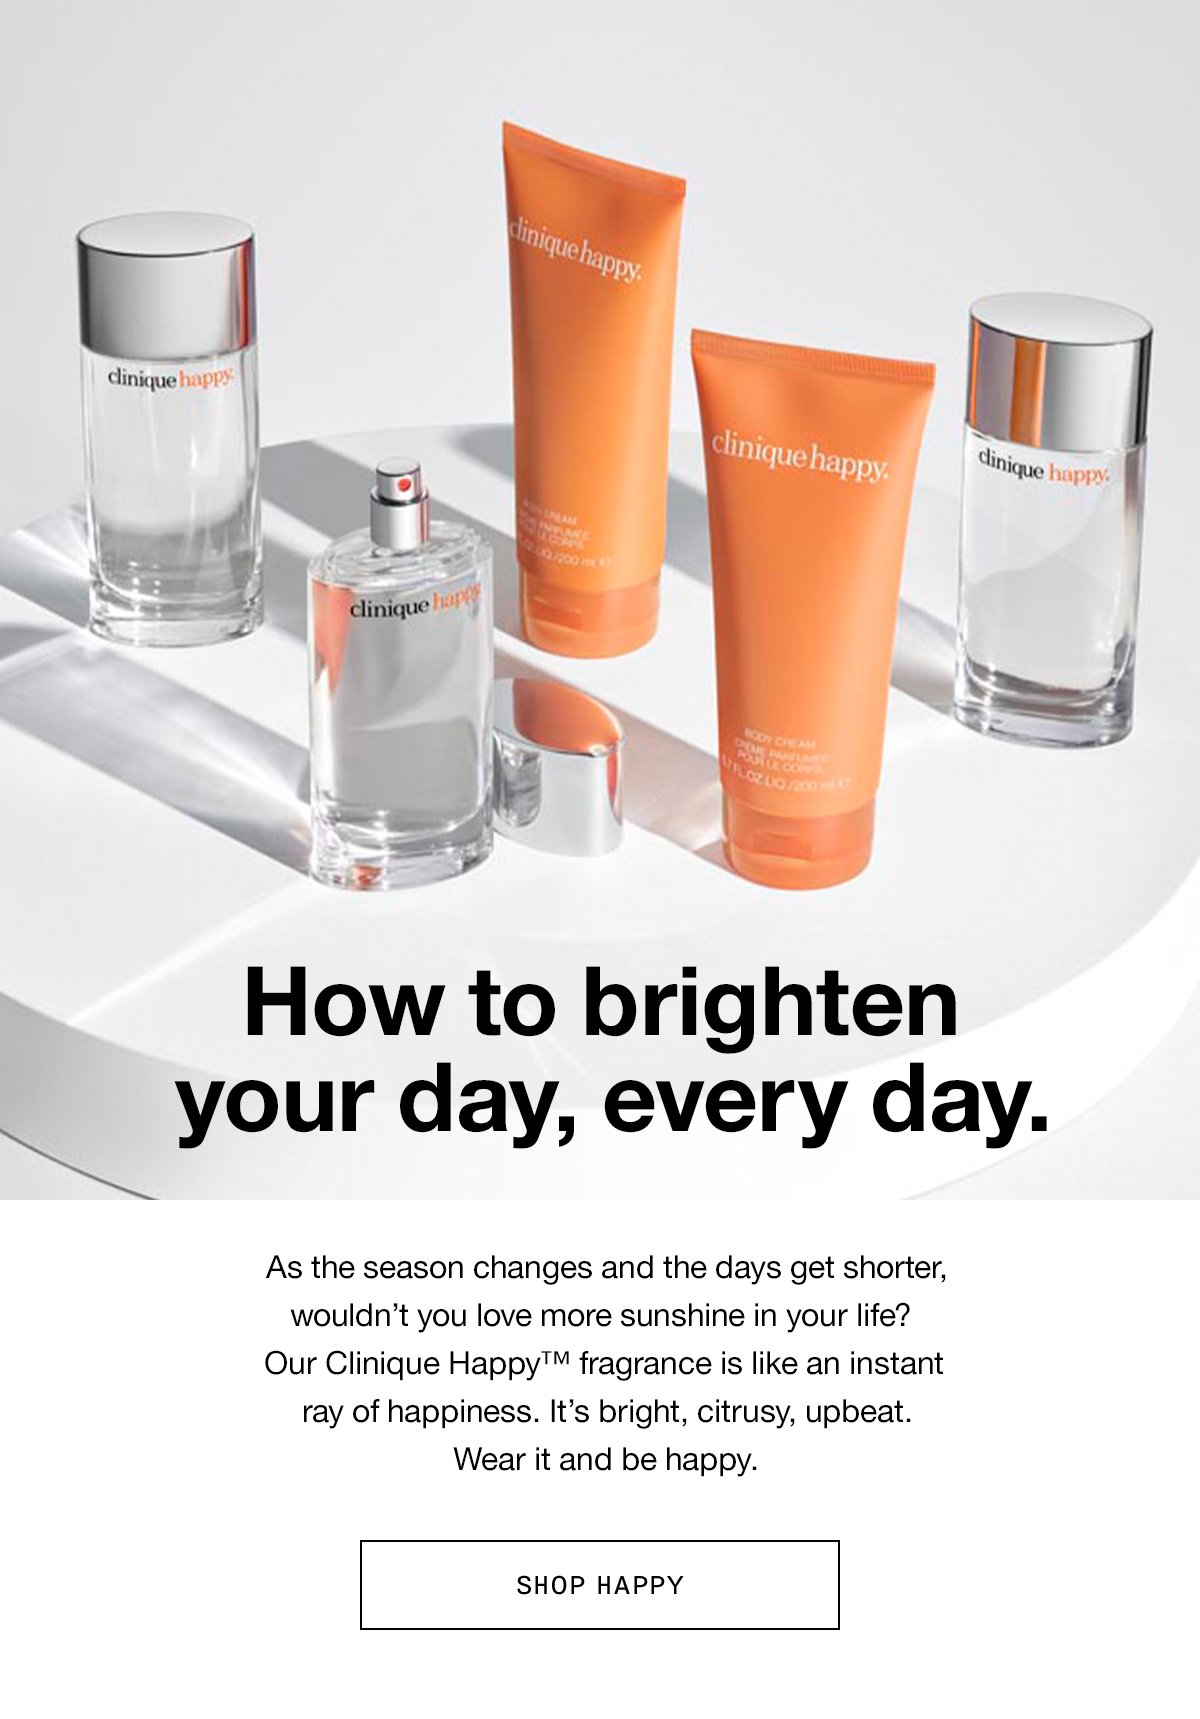 How to brighten your day, every day. As the season changes and the days get shorter, wouldn’t you love more sunshine in your life? Our Clinique Happy™ fragrance is like an instant ray of happiness. It’s bright, citrusy, upbeat. Wear it and be happy. SHOP HAPPY